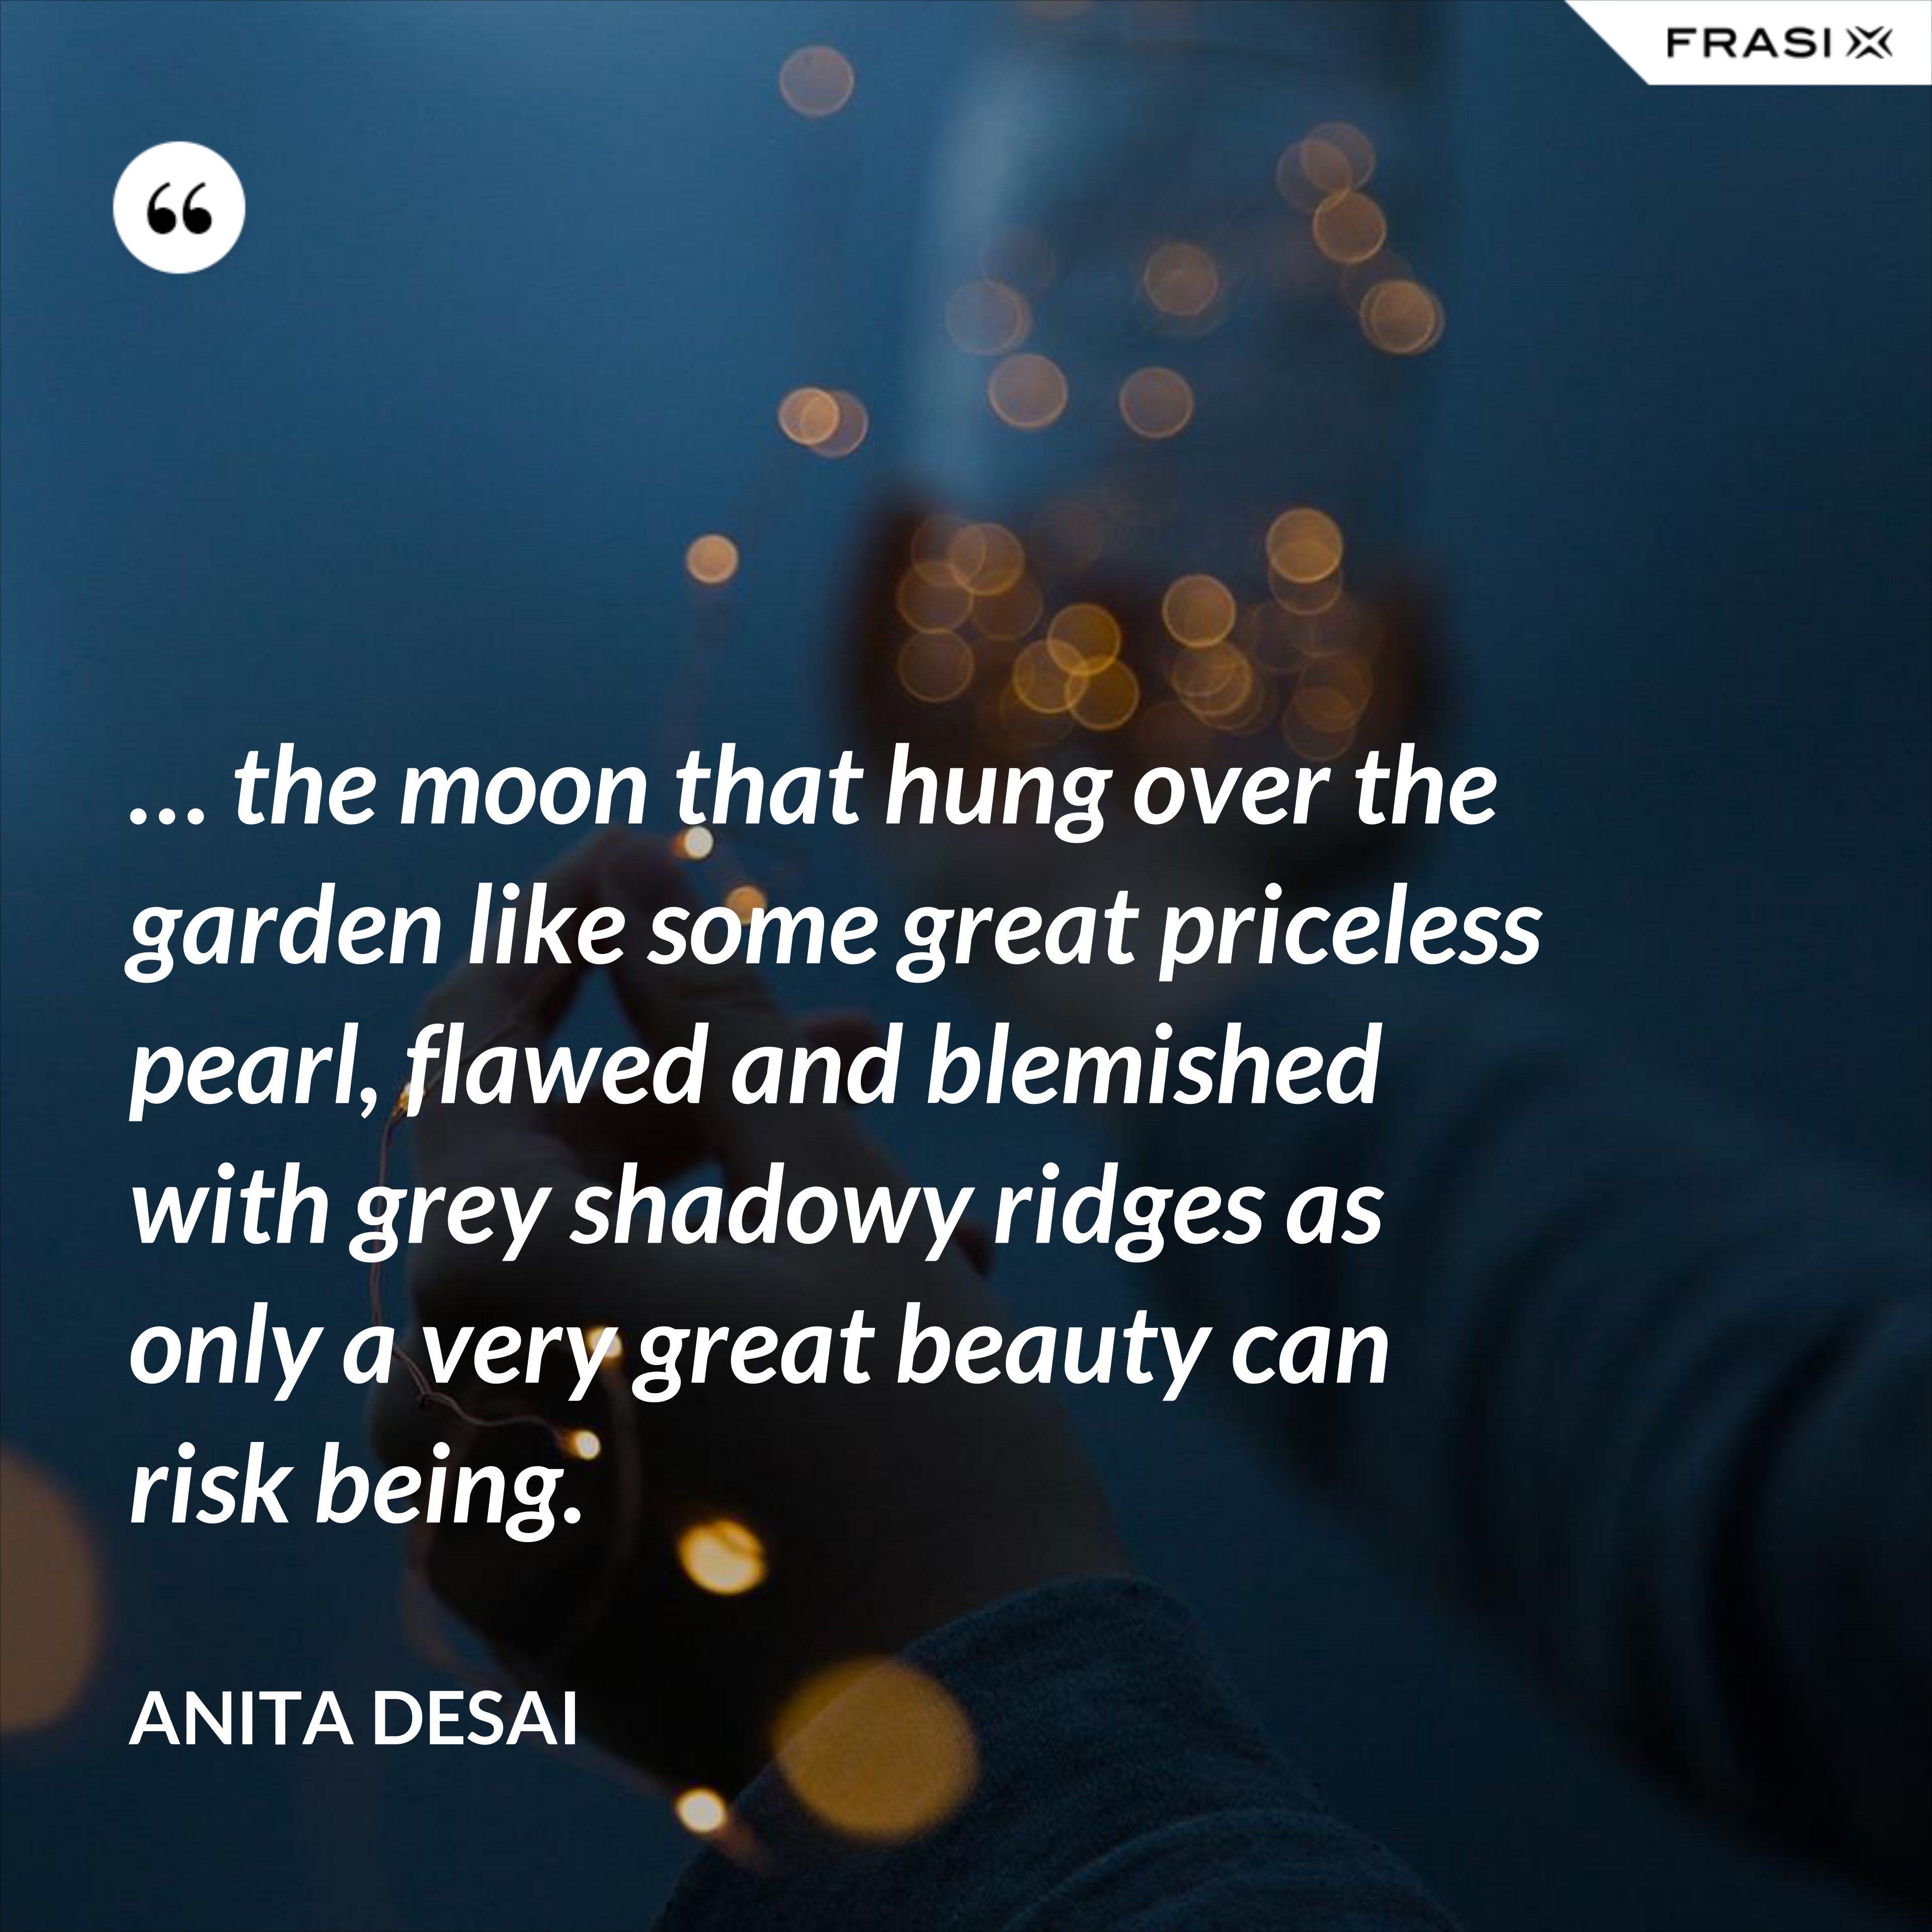 … the moon that hung over the garden like some great priceless pearl, flawed and blemished with grey shadowy ridges as only a very great beauty can risk being. - Anita Desai